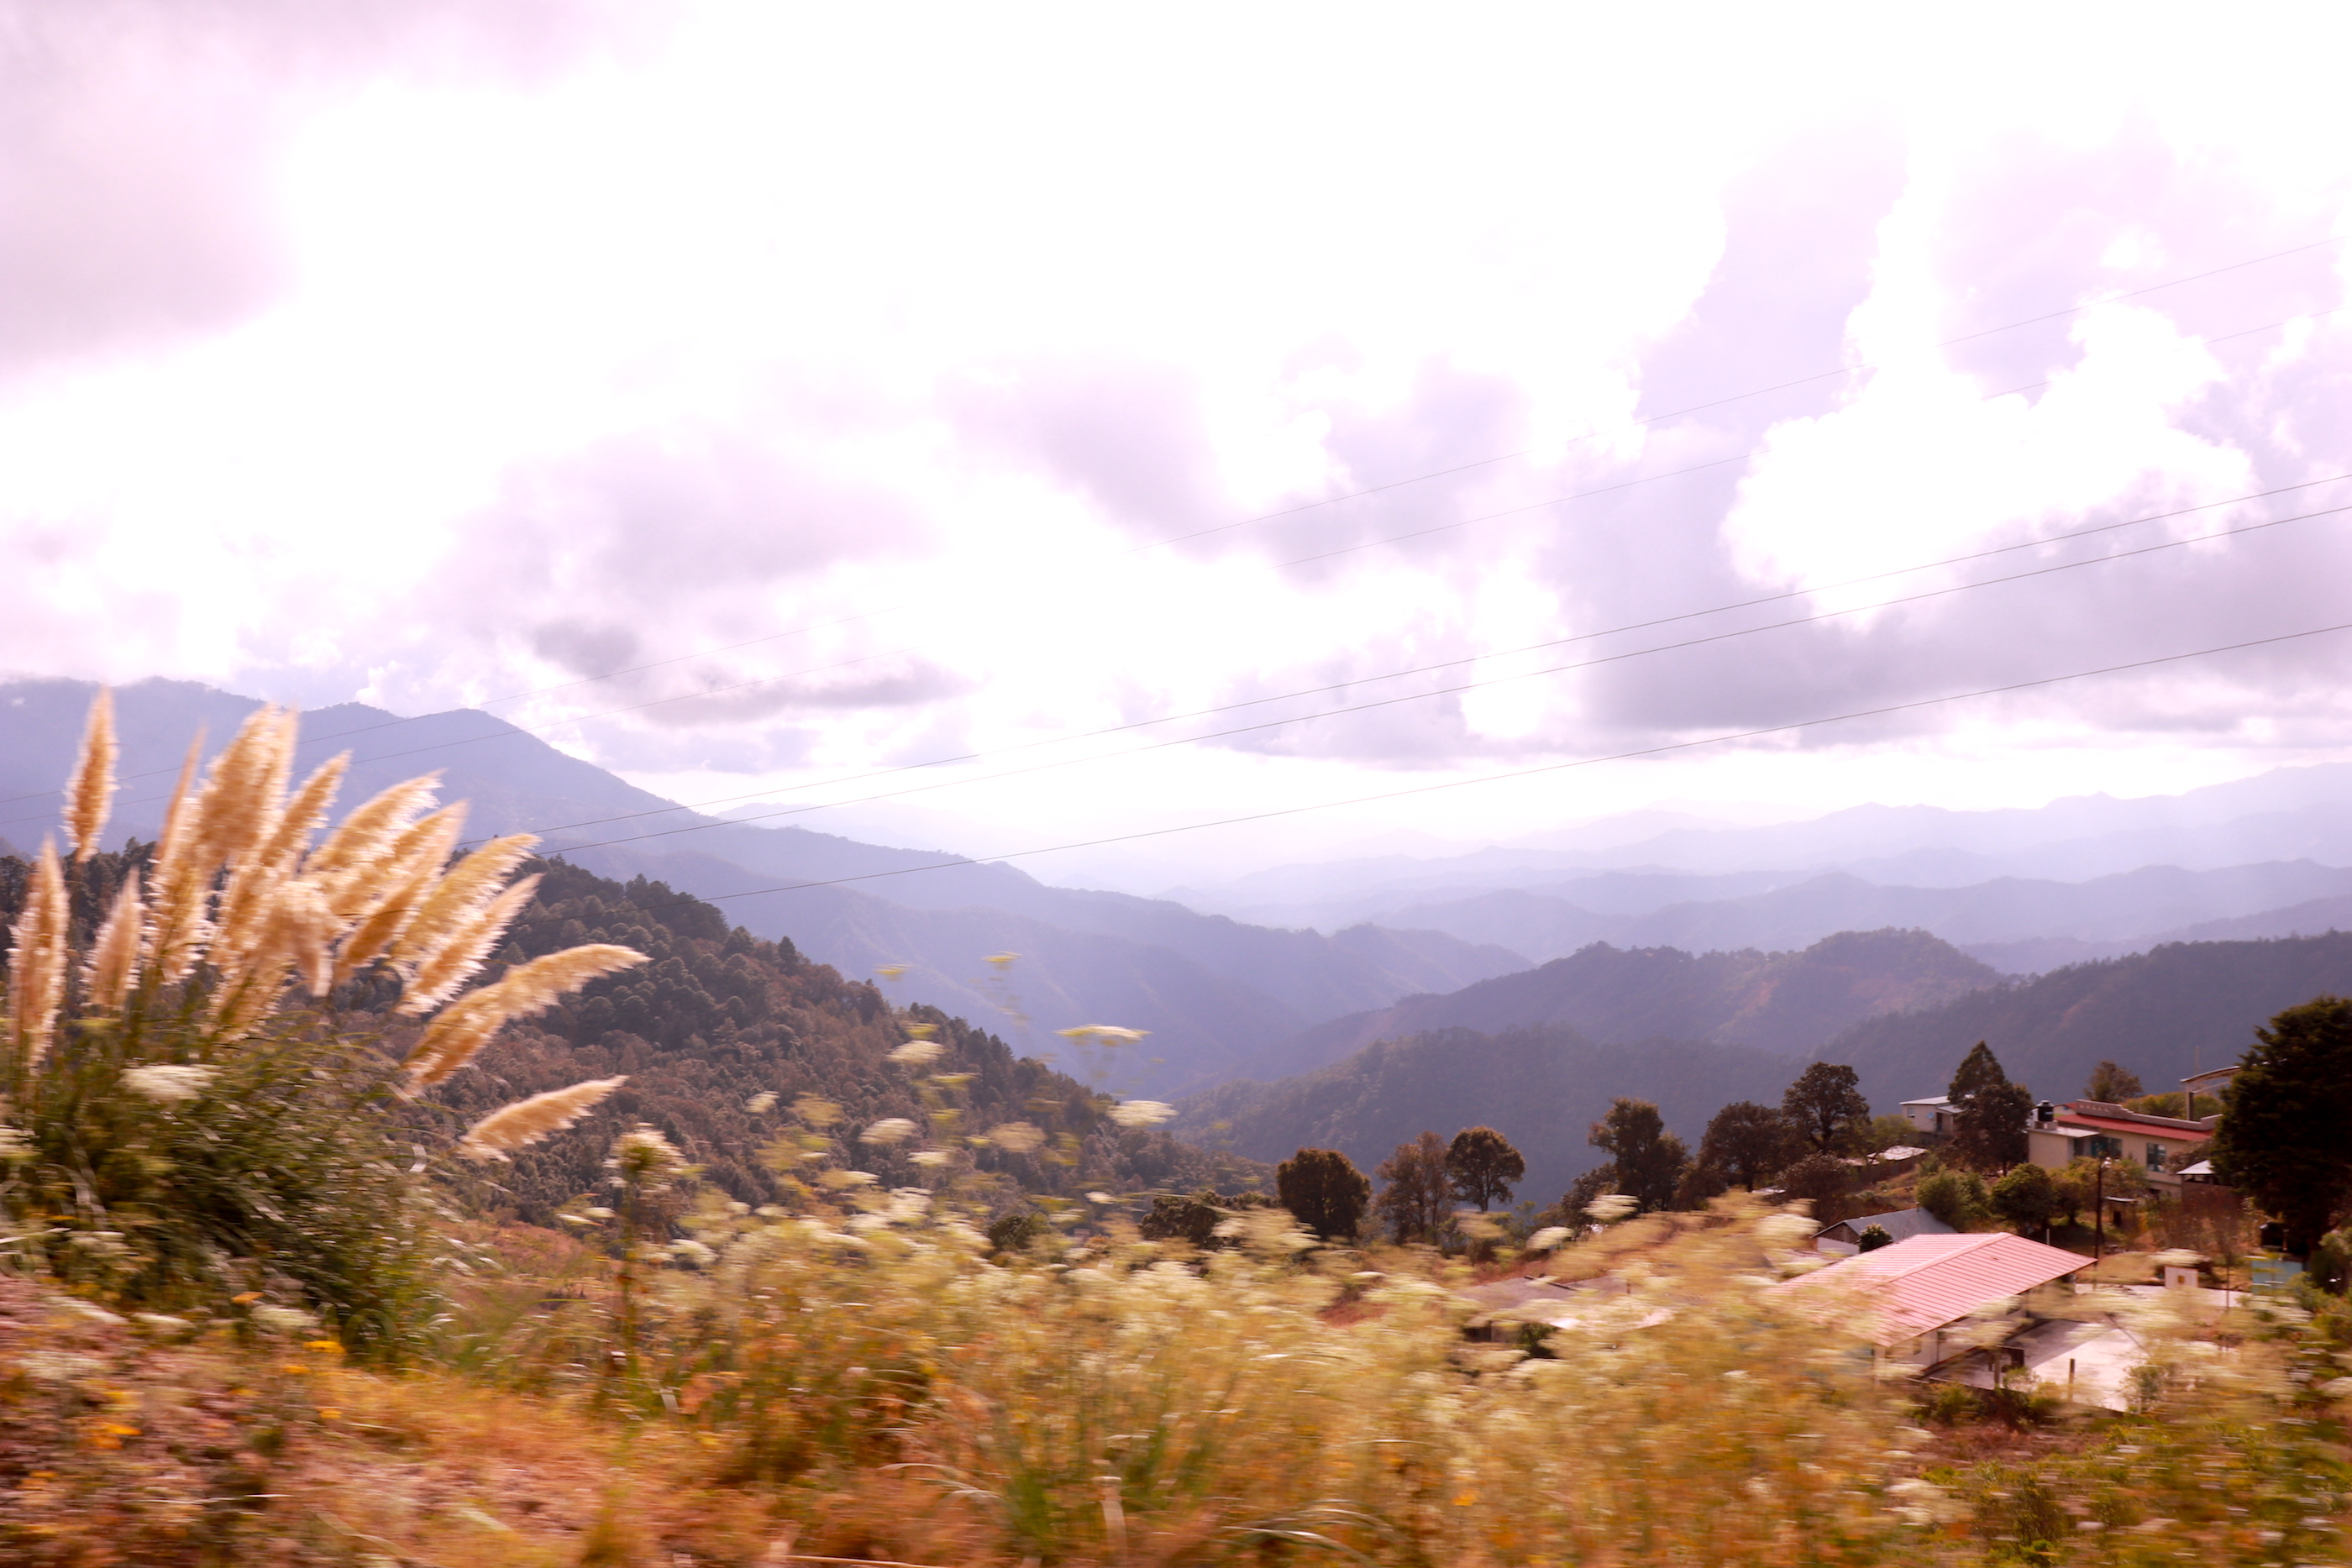 View from the top to the jungle of Sierra Sur mountains, Oaxaca